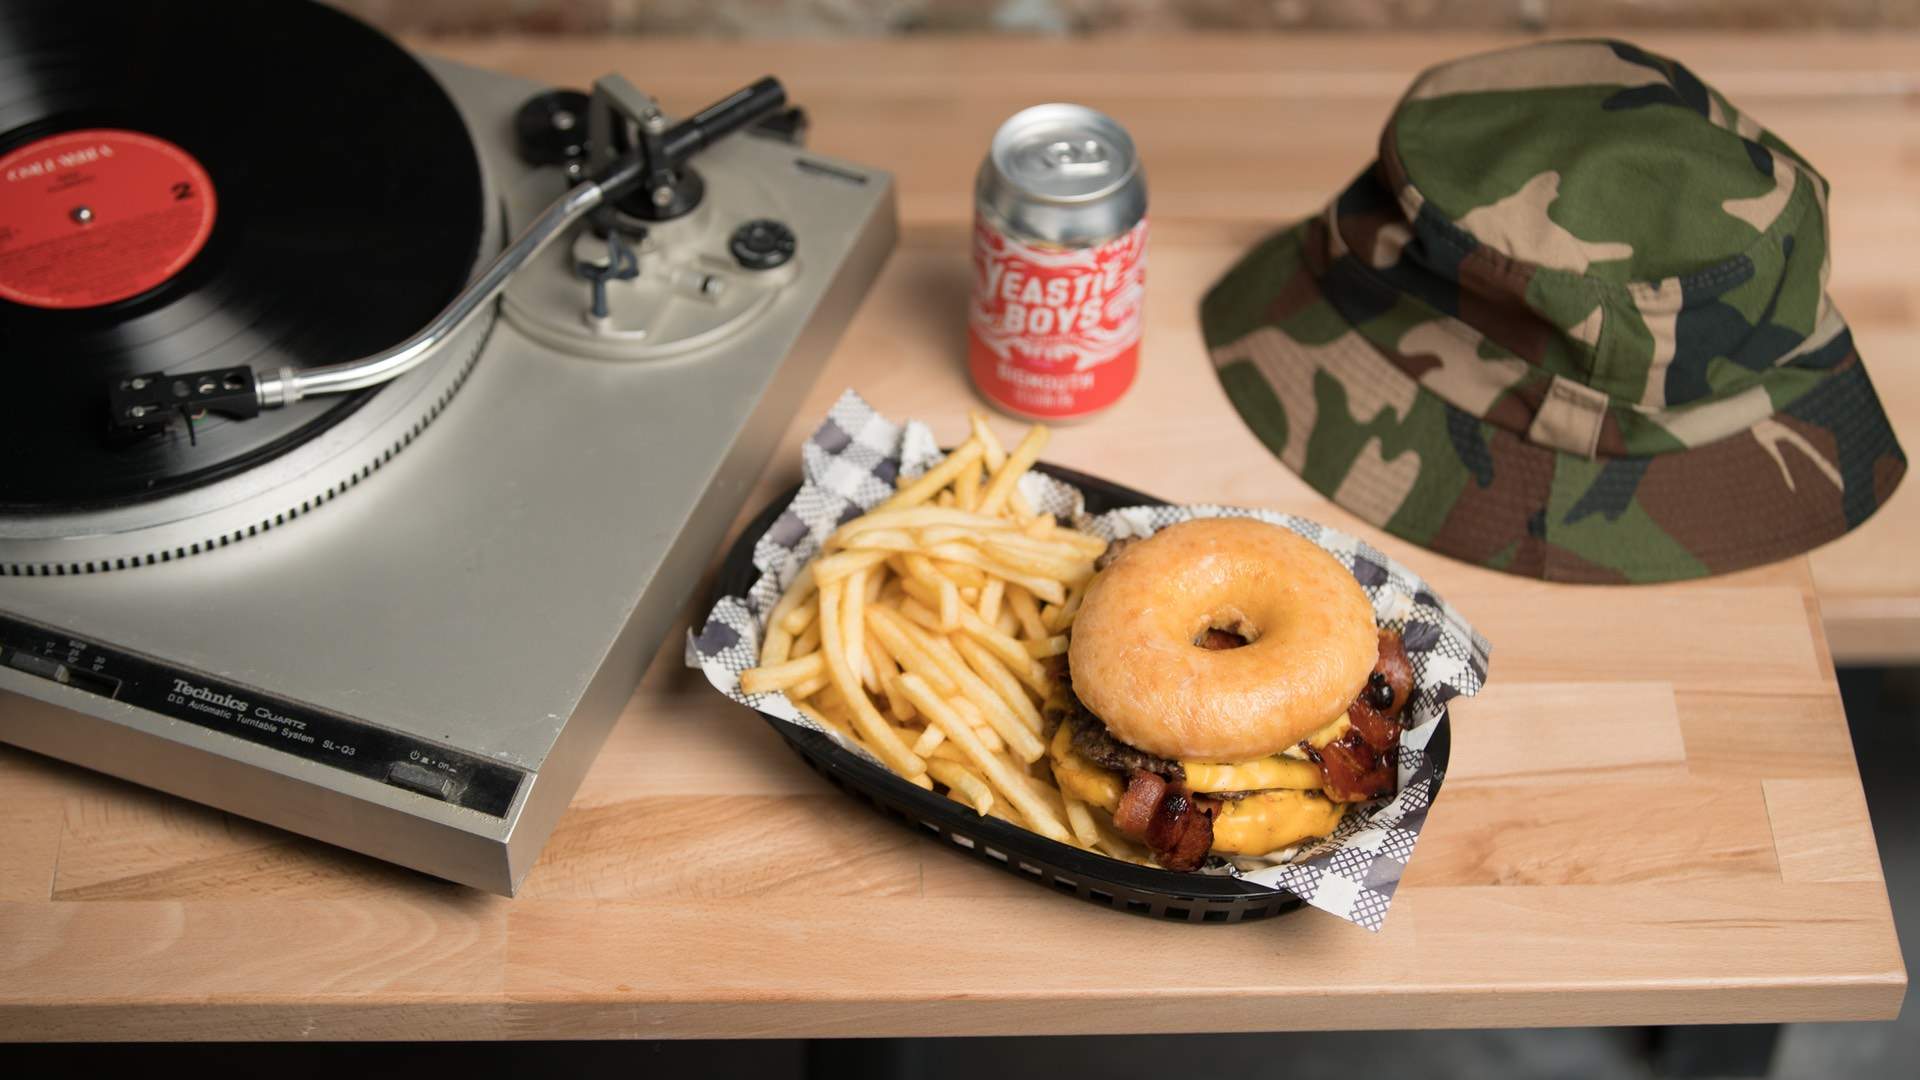 Hip Hop-Loving Ethical Burger Joint 4 Ounces Is Expanding to Leichhardt